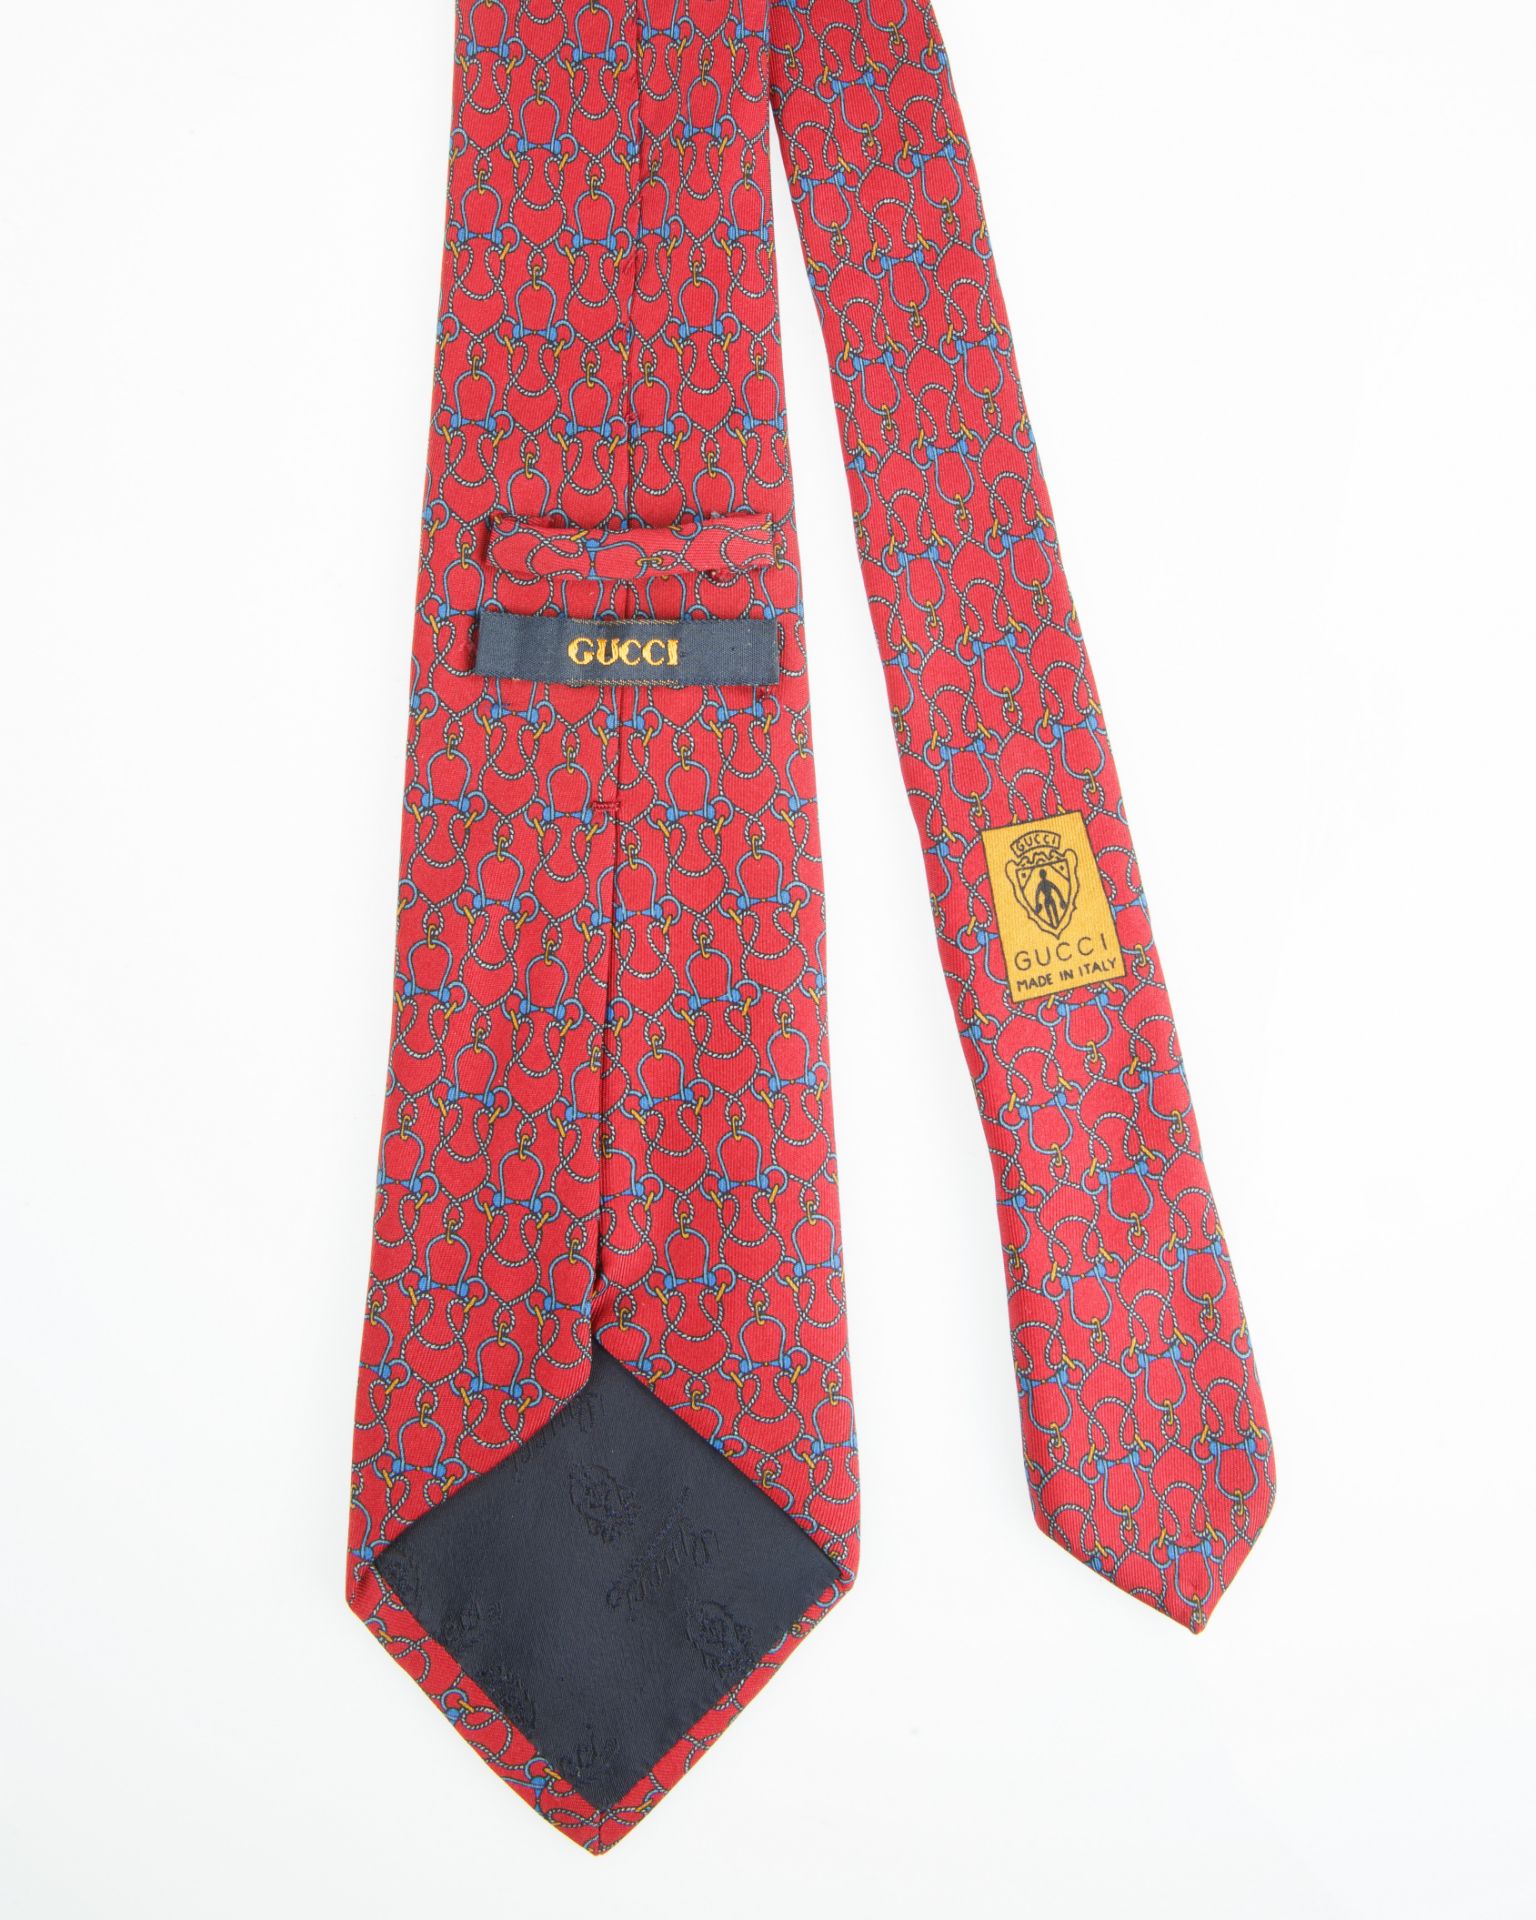 GROUP OF SEVEN GUCCI TIES - Image 13 of 15